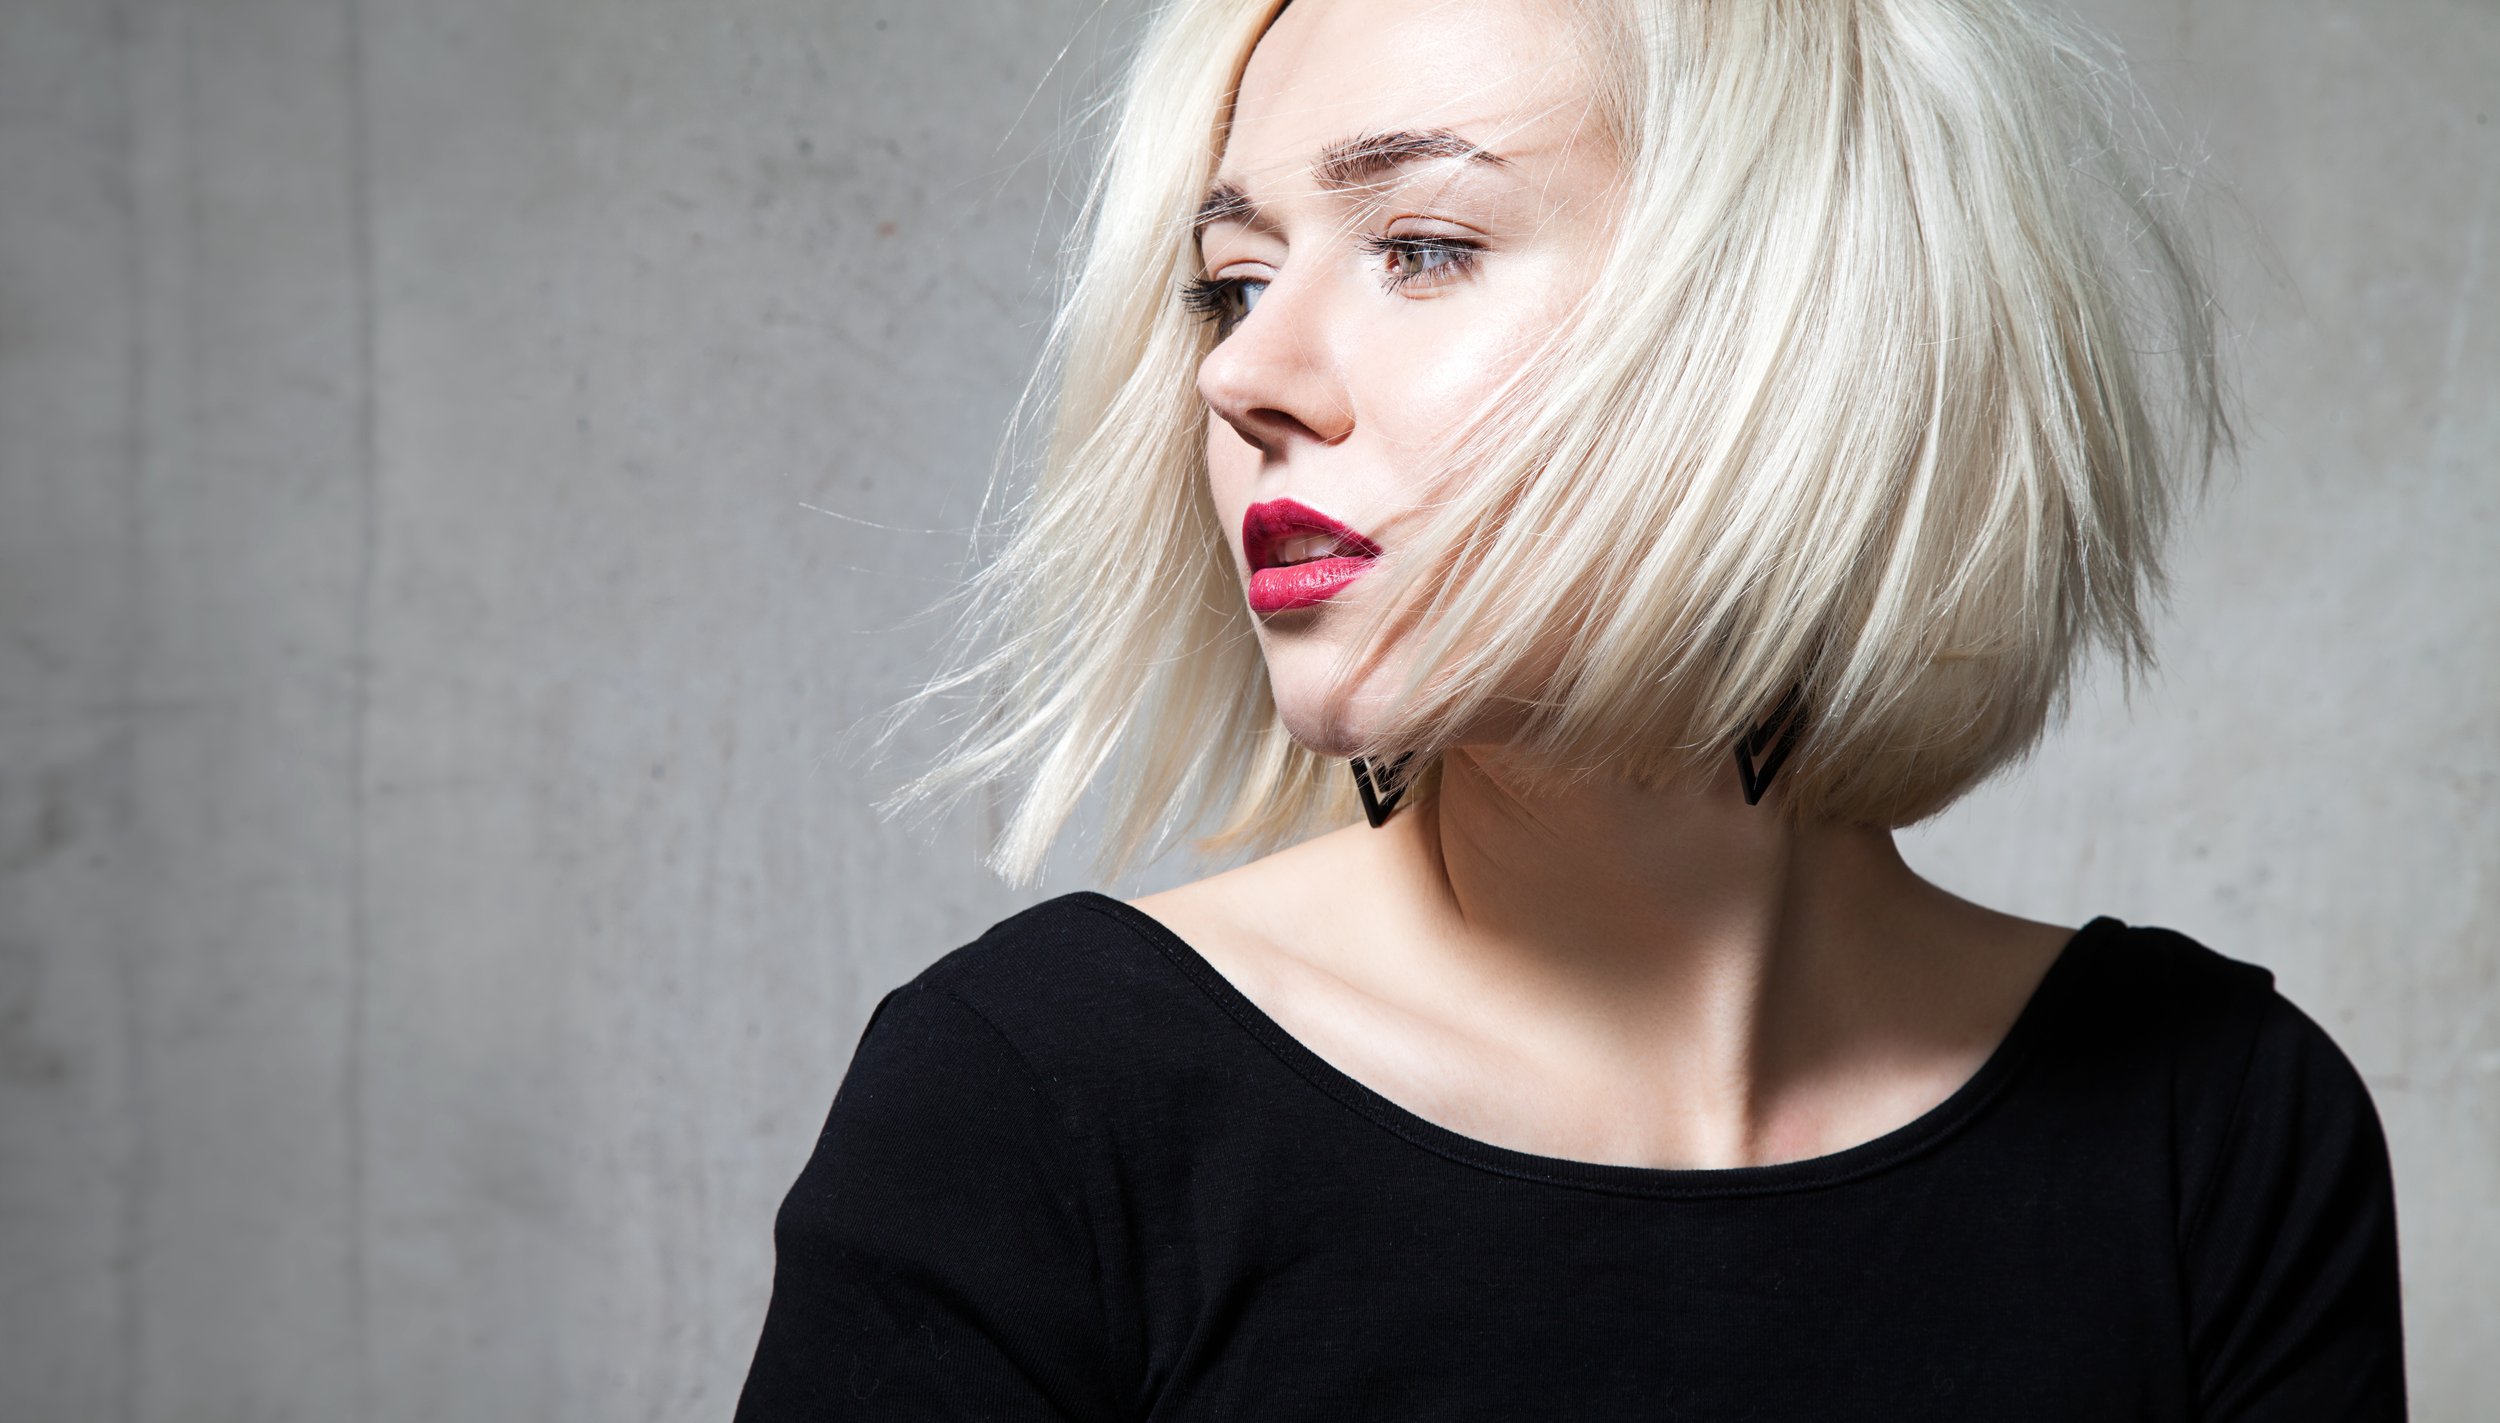 Close-up-portrait-of-a-beautiful-blonde-with-red-lips-539953438_6576x3744.jpeg